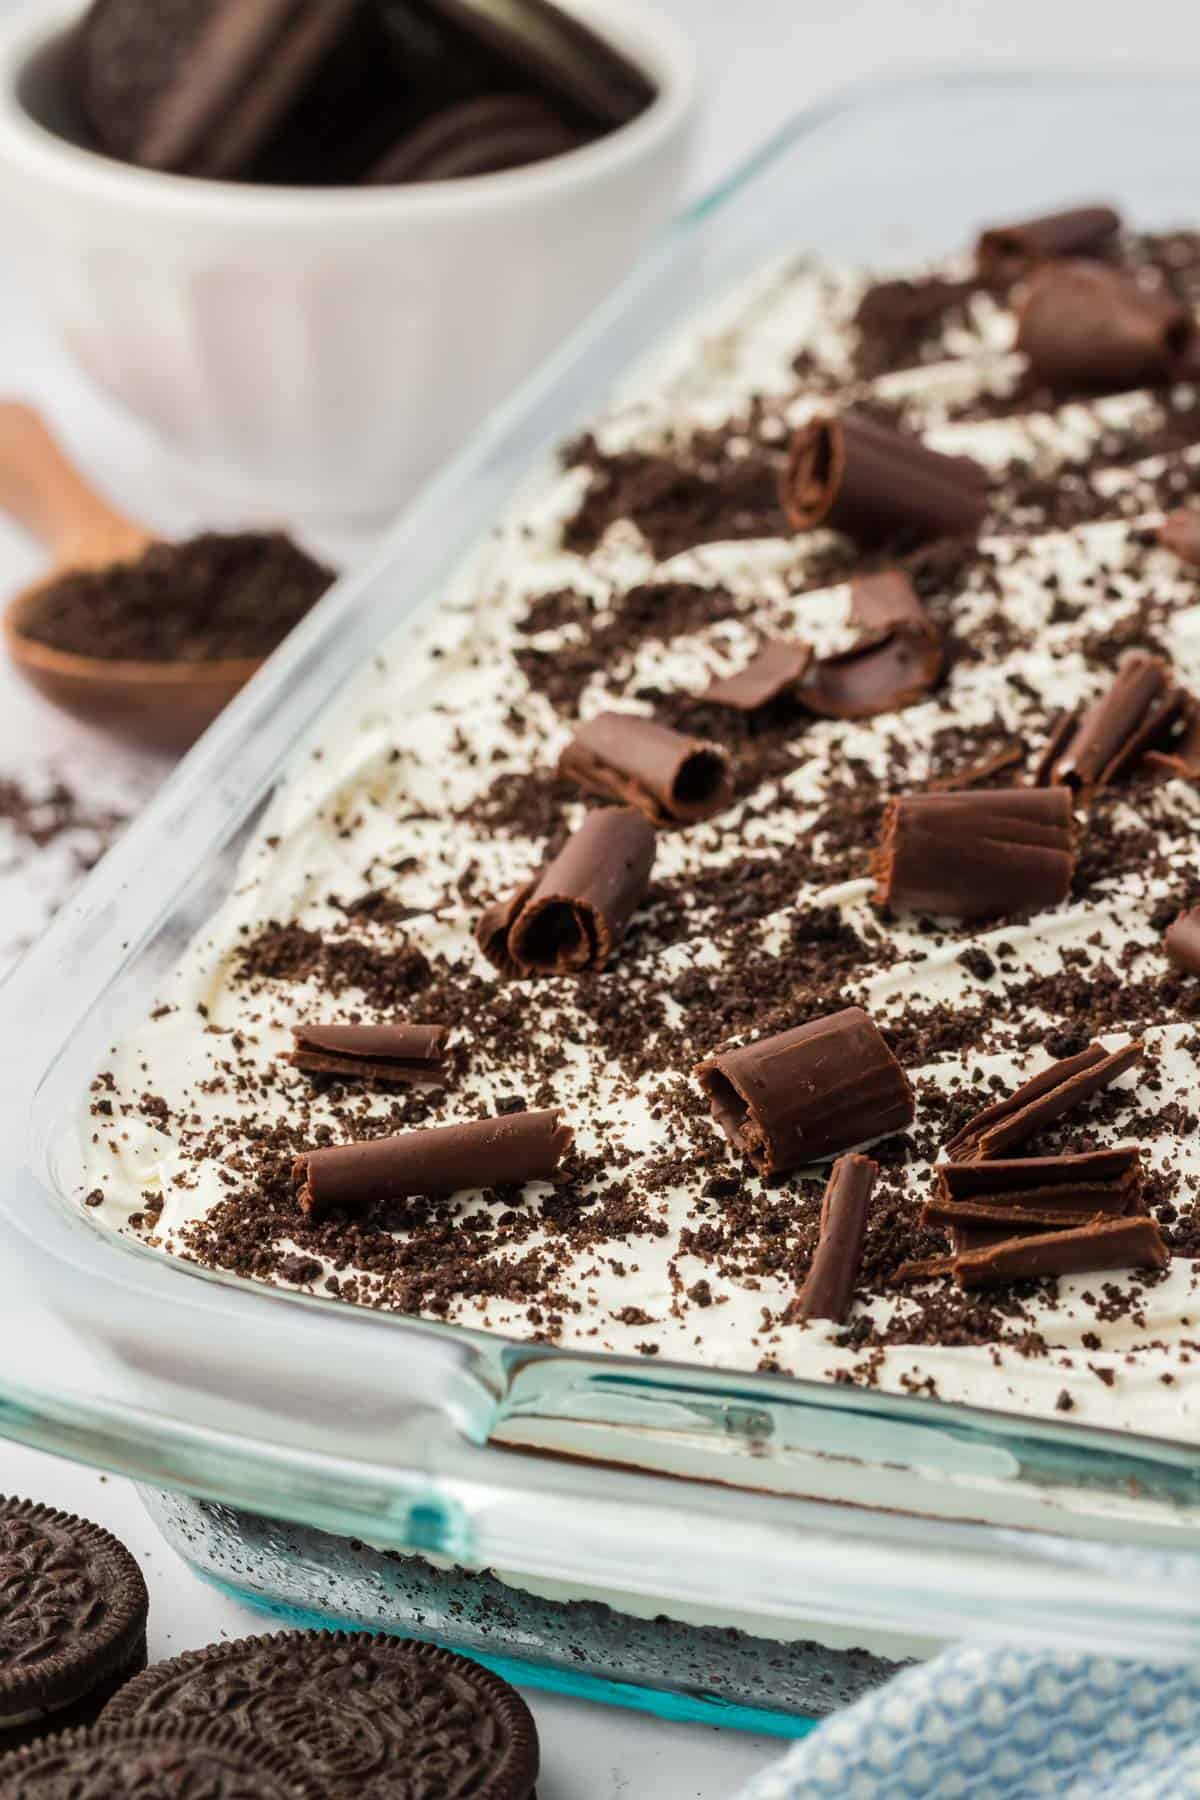 a close up of the top of a pan of chocolate lasagna topping with chocolate shavings and oreo crumbs then surrounded by whole oreos and a spoon full of oreo crumbs